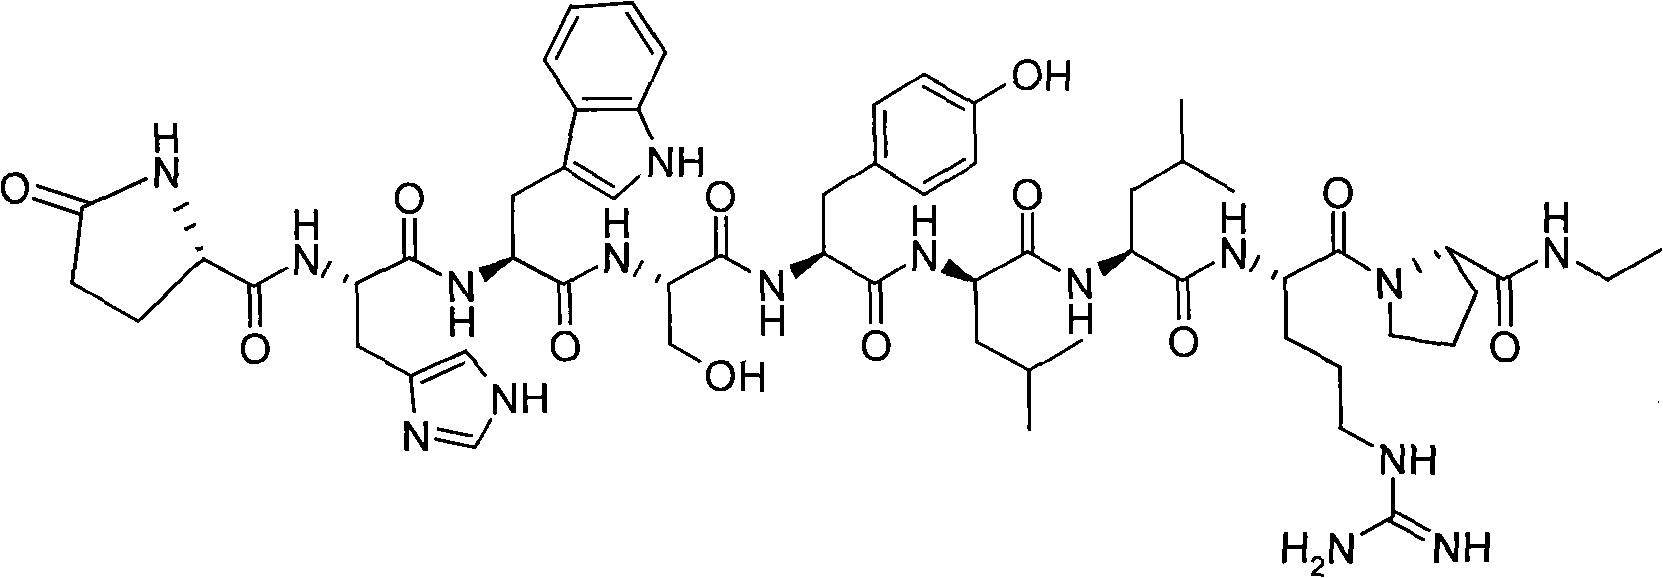 Solid phase synthesis method of leuprorelin